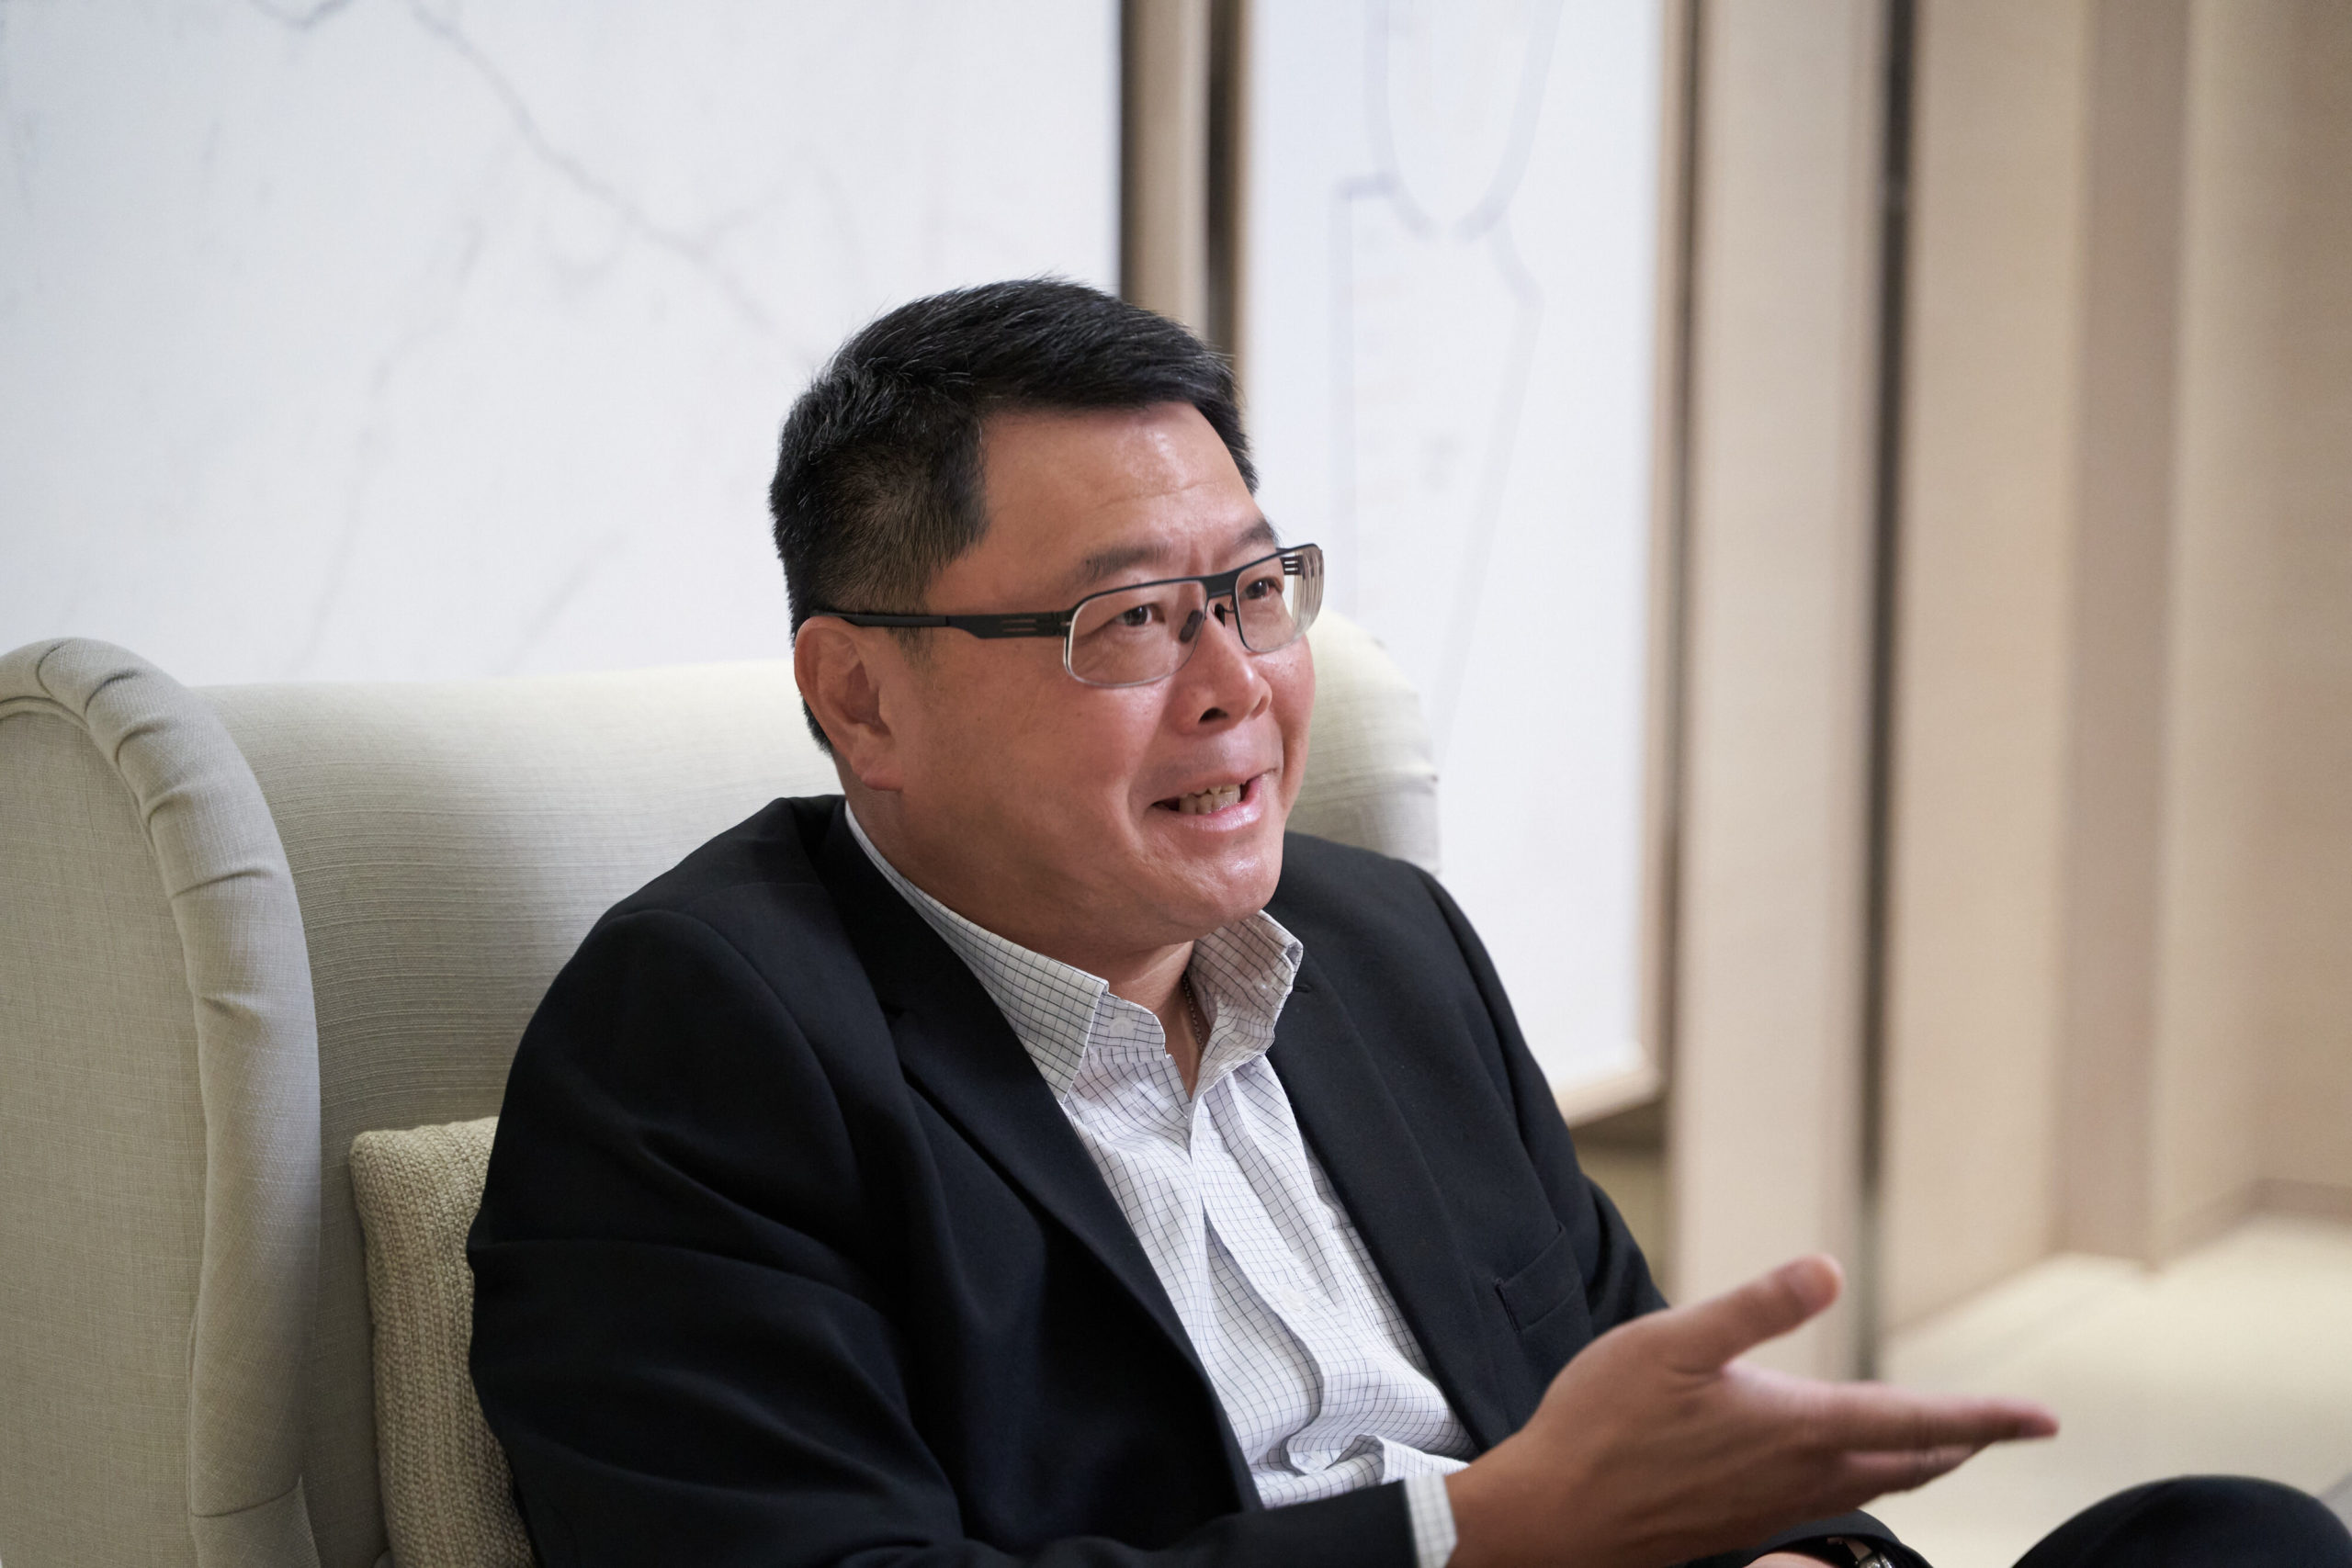 A seasoned industrialist, Sunny is championing the upgrade and transformation of Hong Kong’s industrial estates. He is an active supporter of the government’s “re-industrialisation” initiatives.